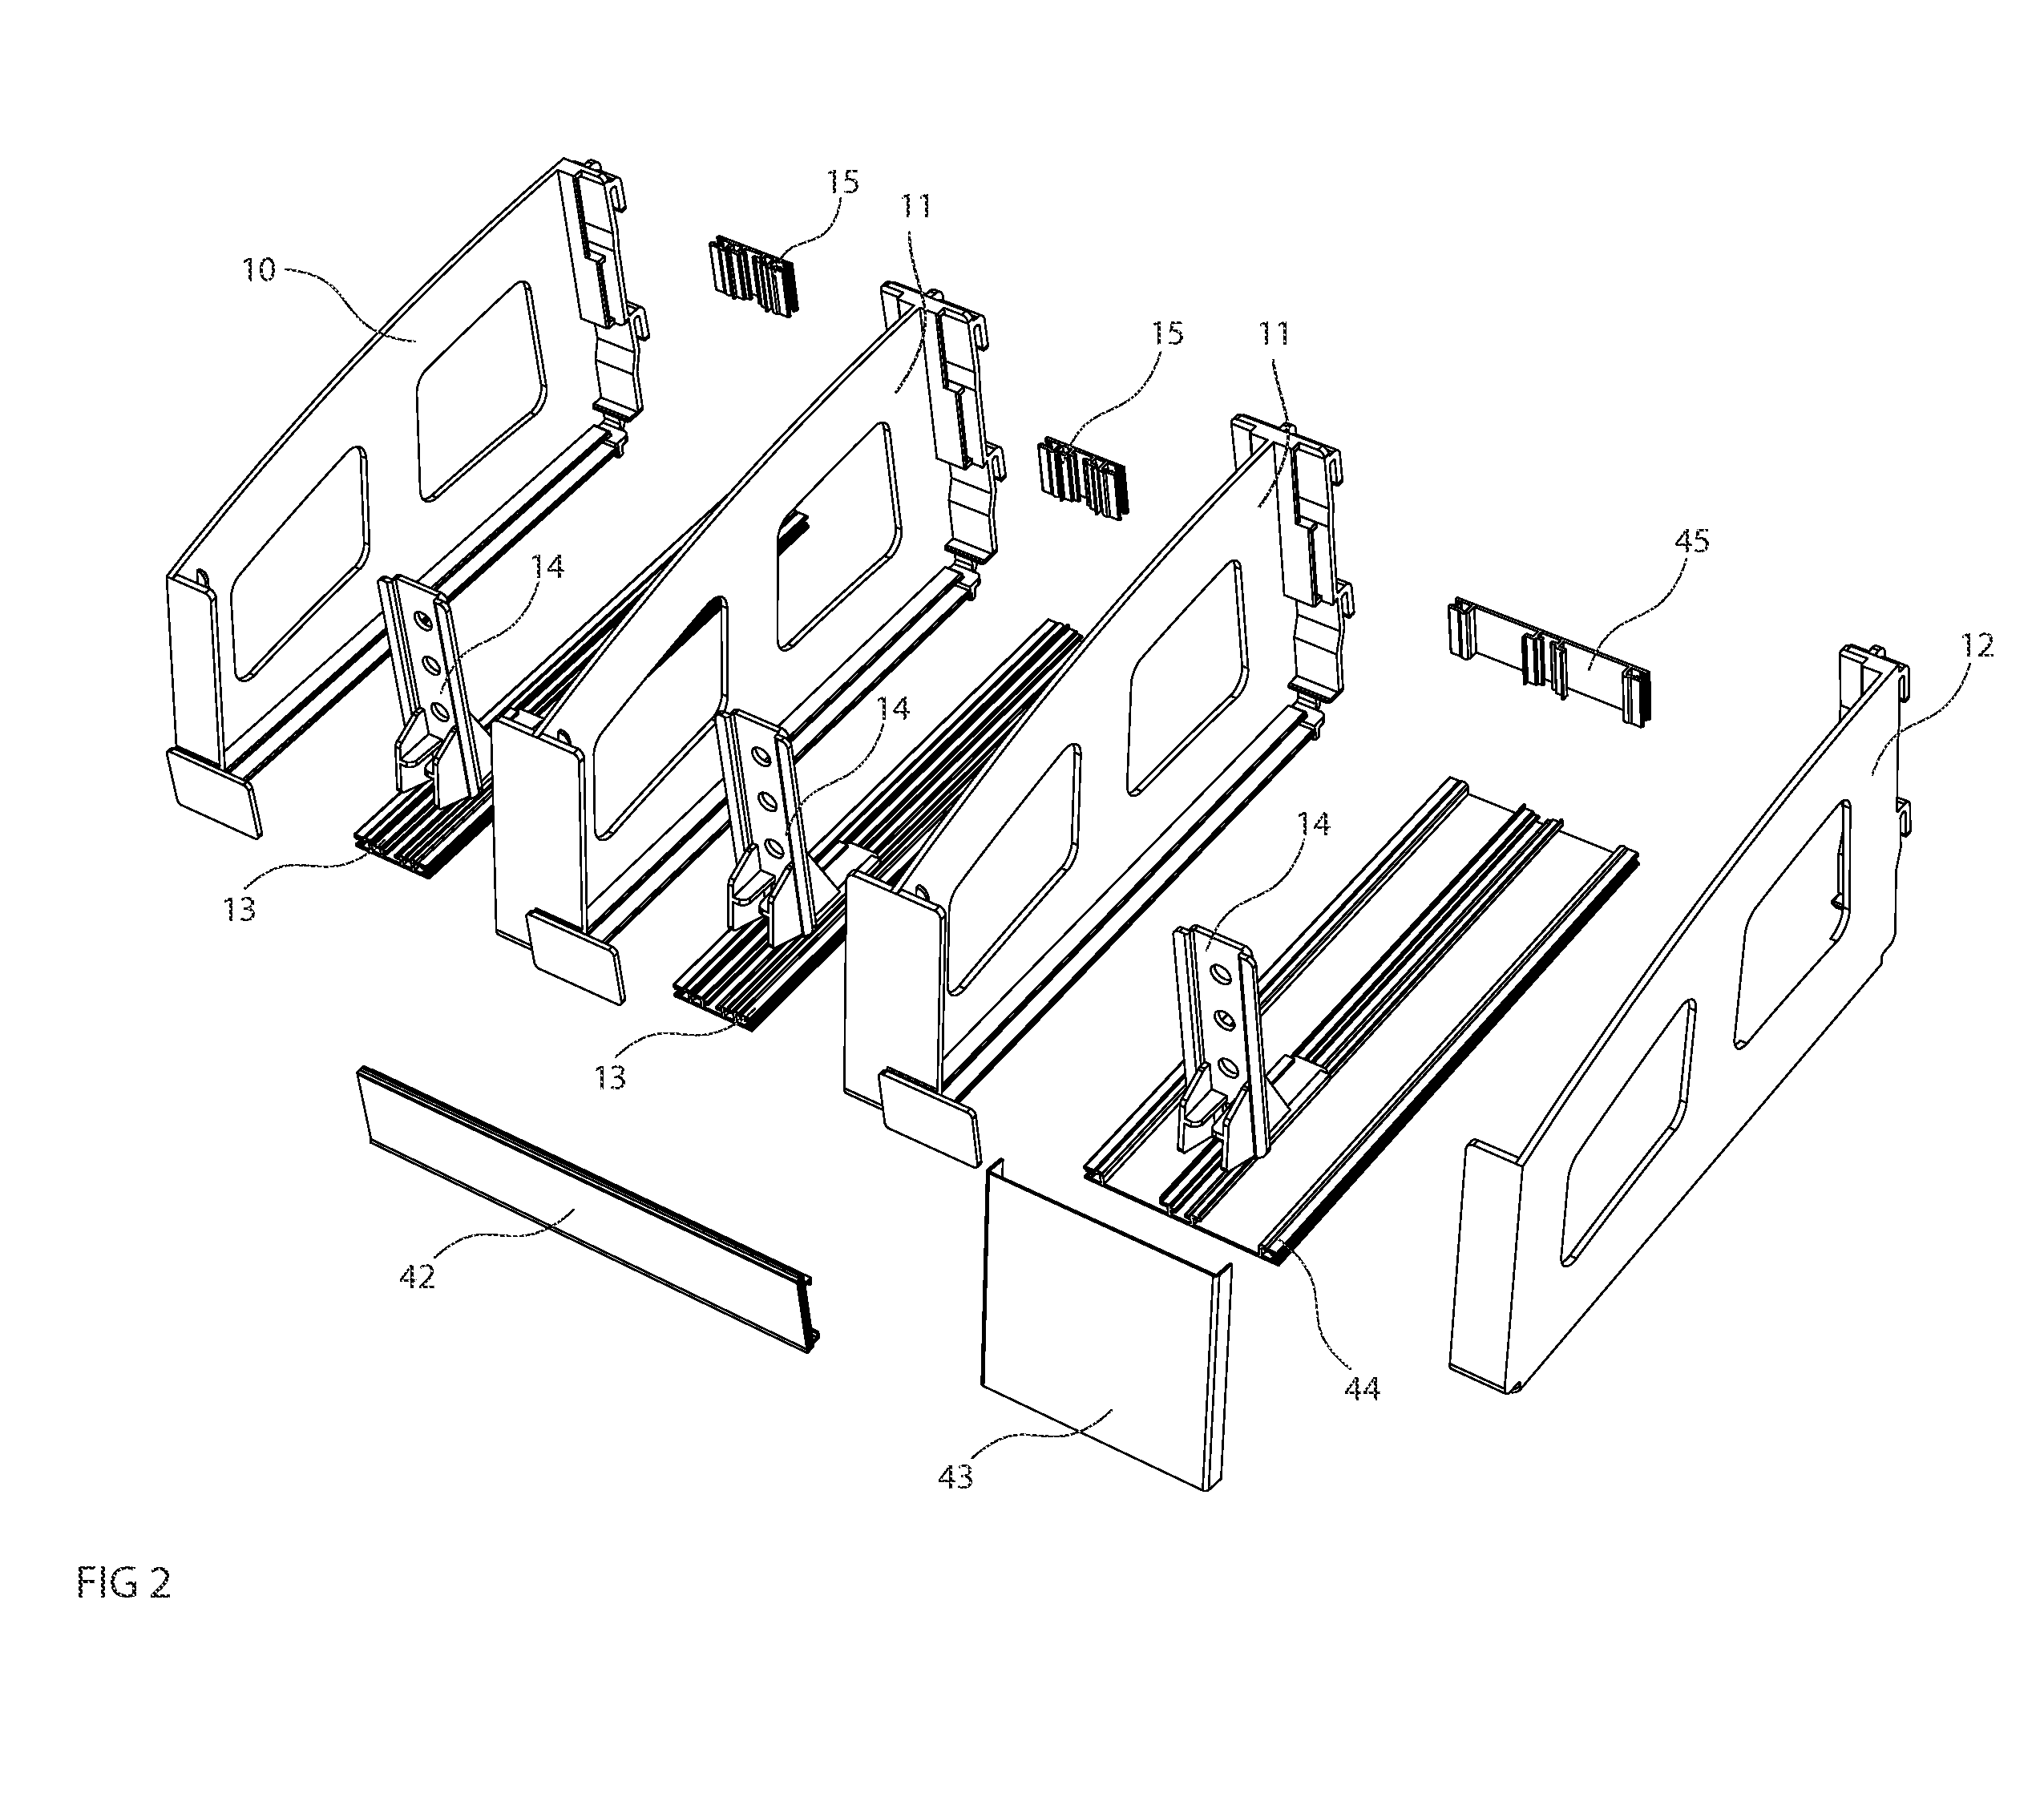 Adjustable depth merchandising crossbar systems and methods for dividing, pushing and/or dispensing one or more retail products